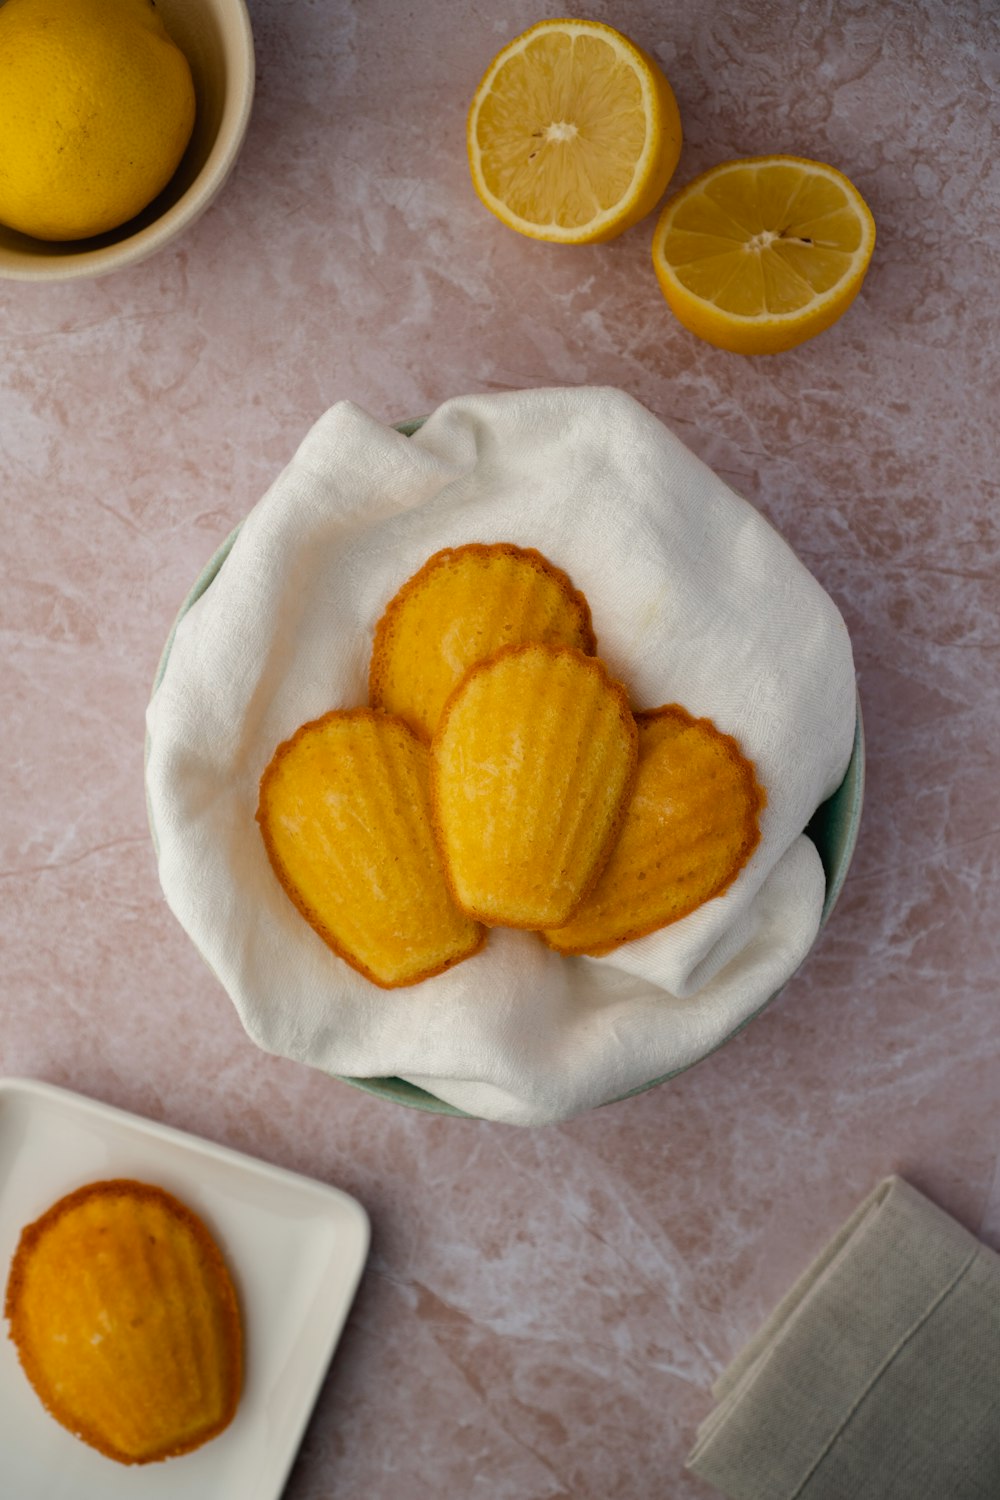 a bowl of peeled oranges next to a plate of sliced oranges